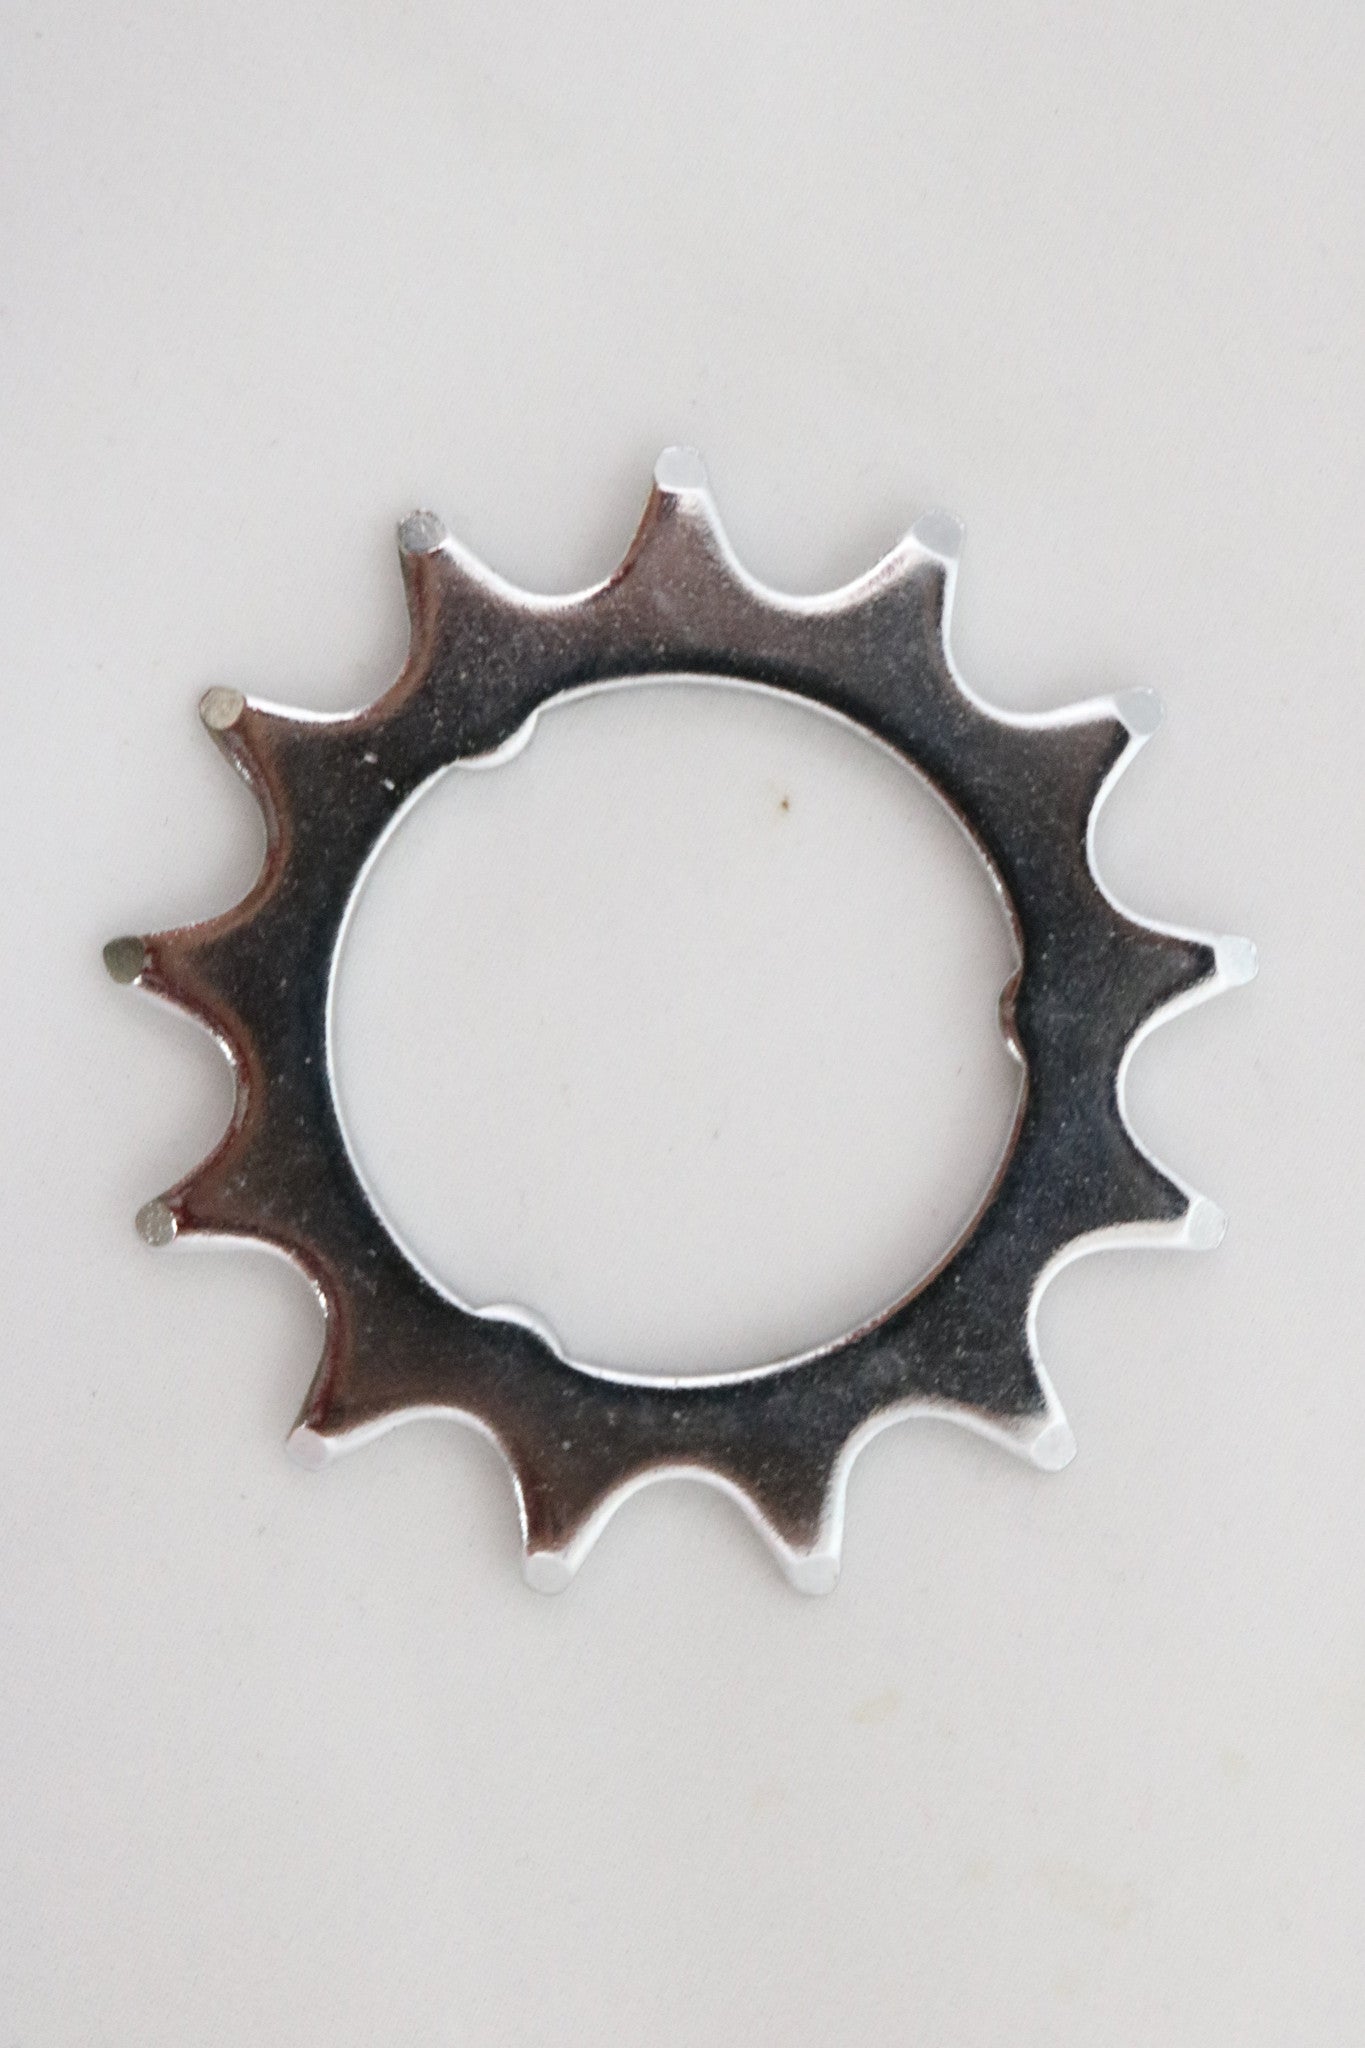 Brompton 13 tooth rear sprocket 3mm for 3 speed and SRAM 6-speed